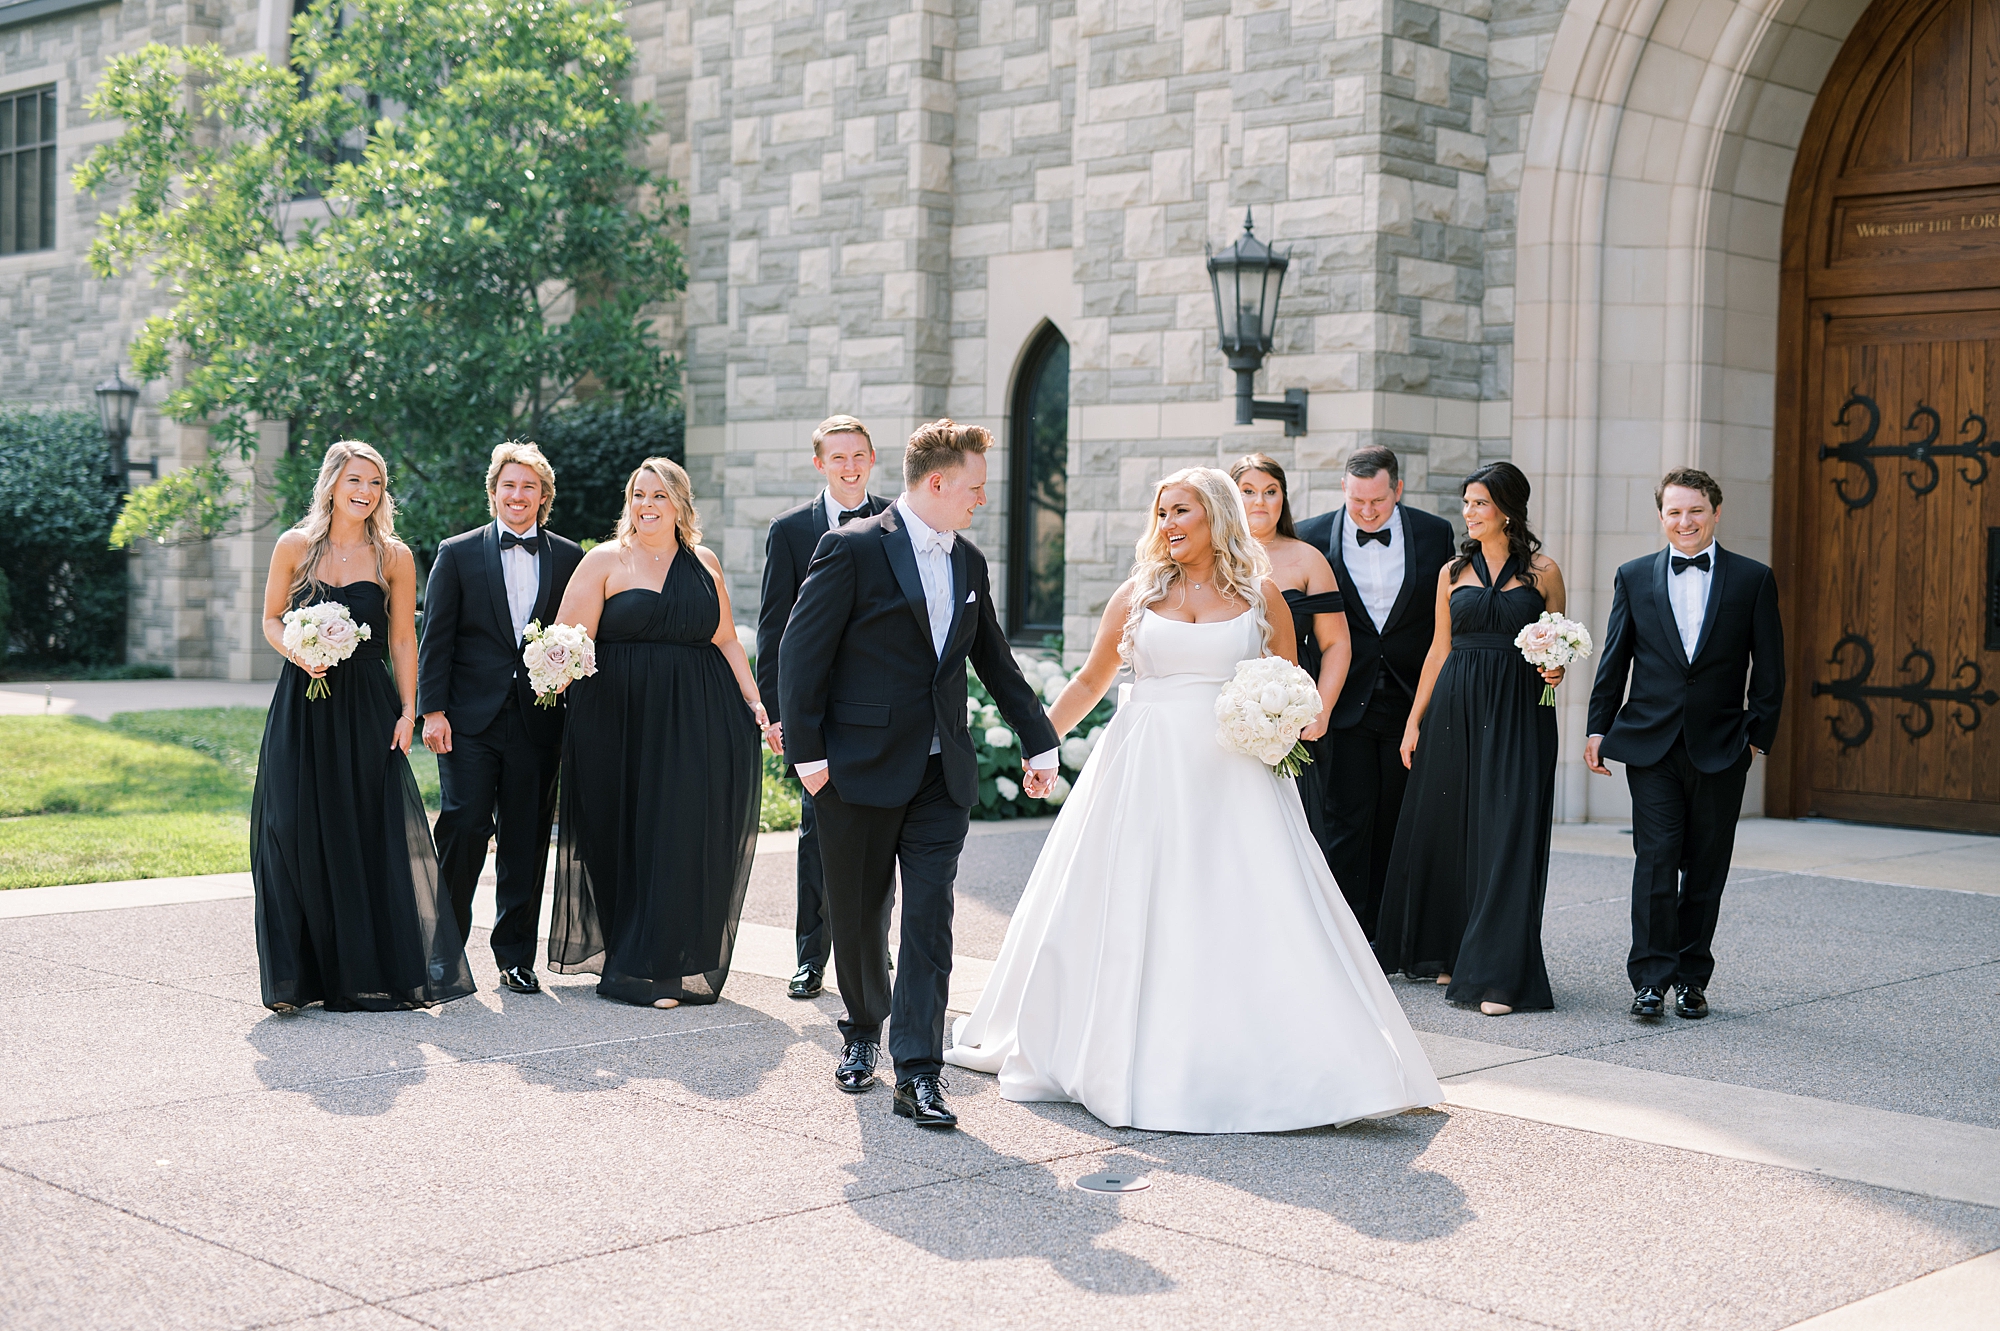 bride and groom with their wedding party dressed in black